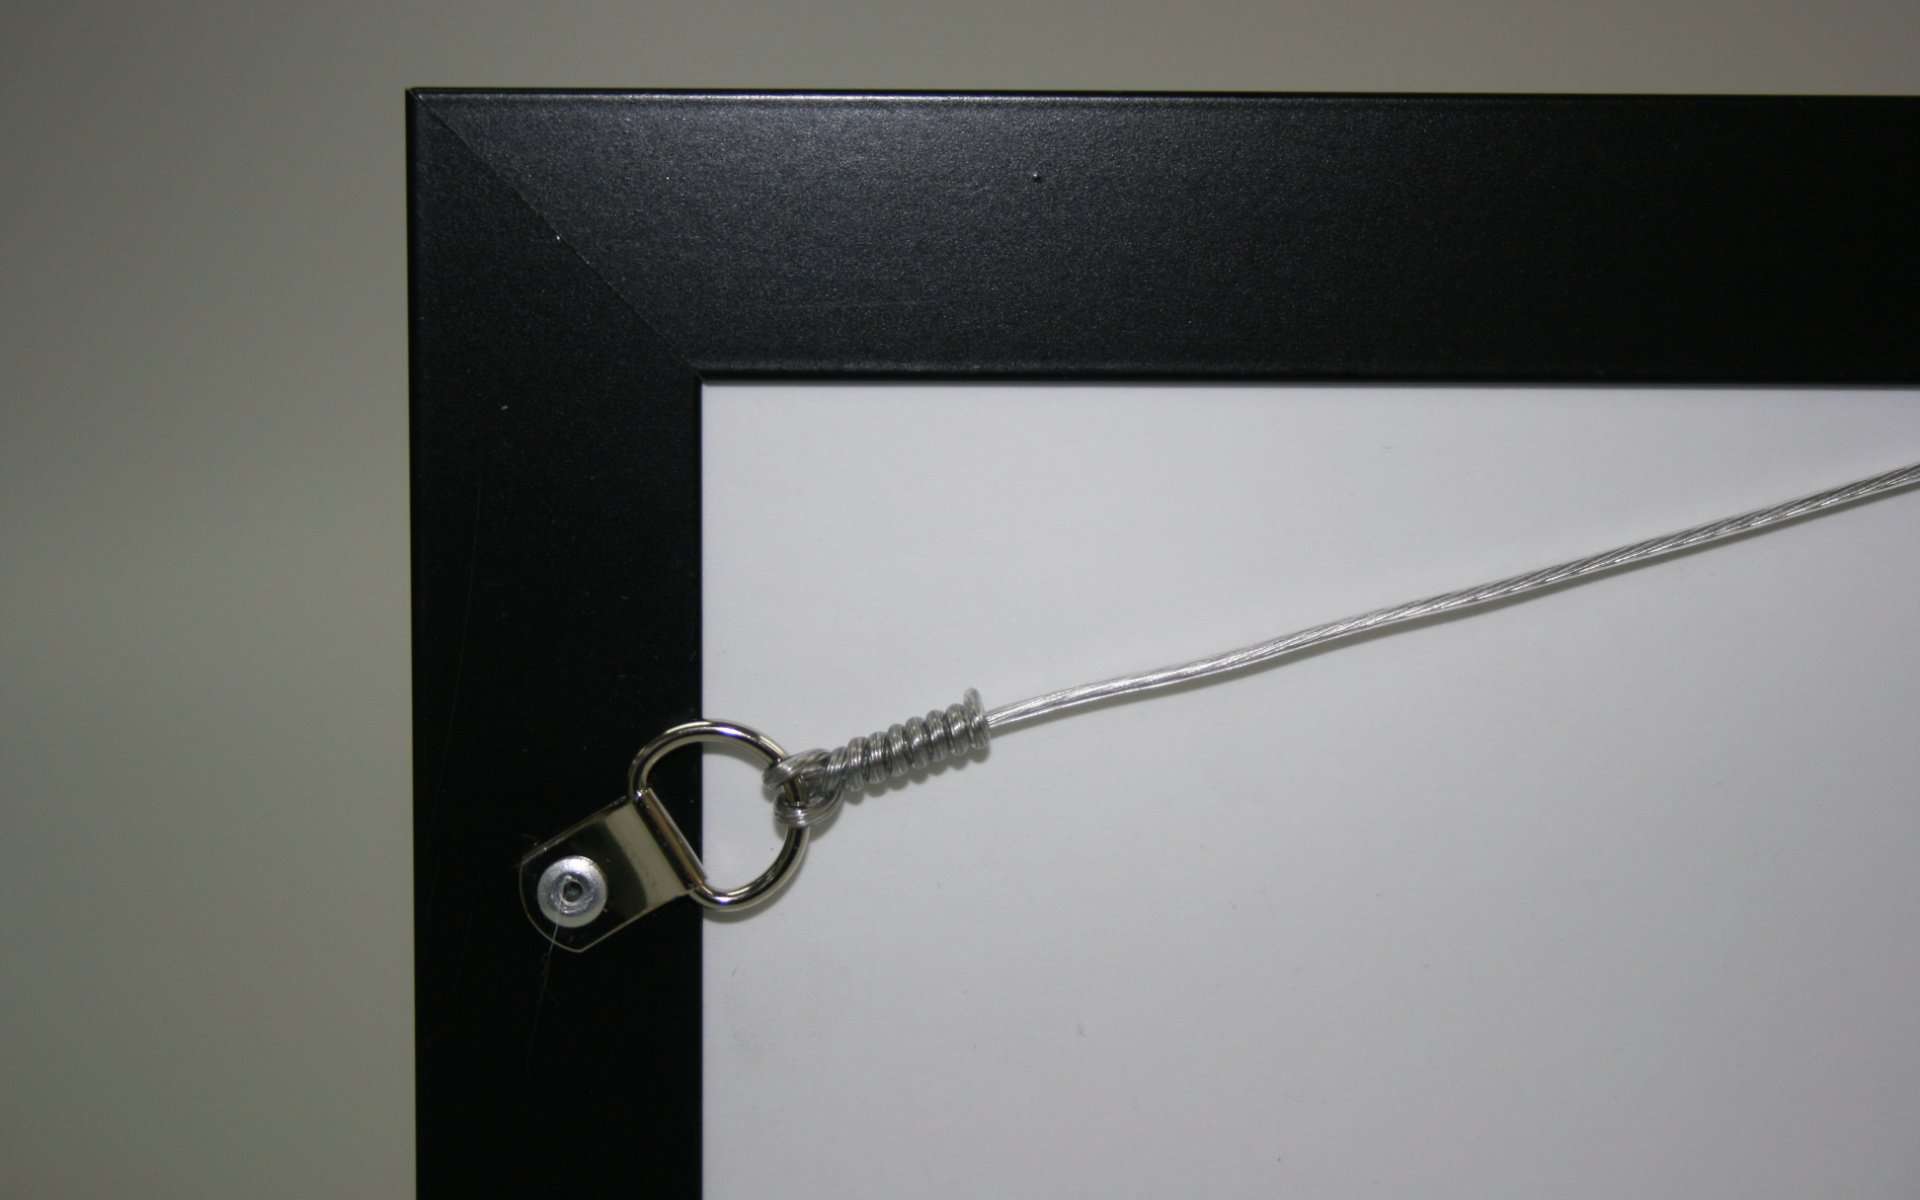 Acrylic Artframe showing back and hanger